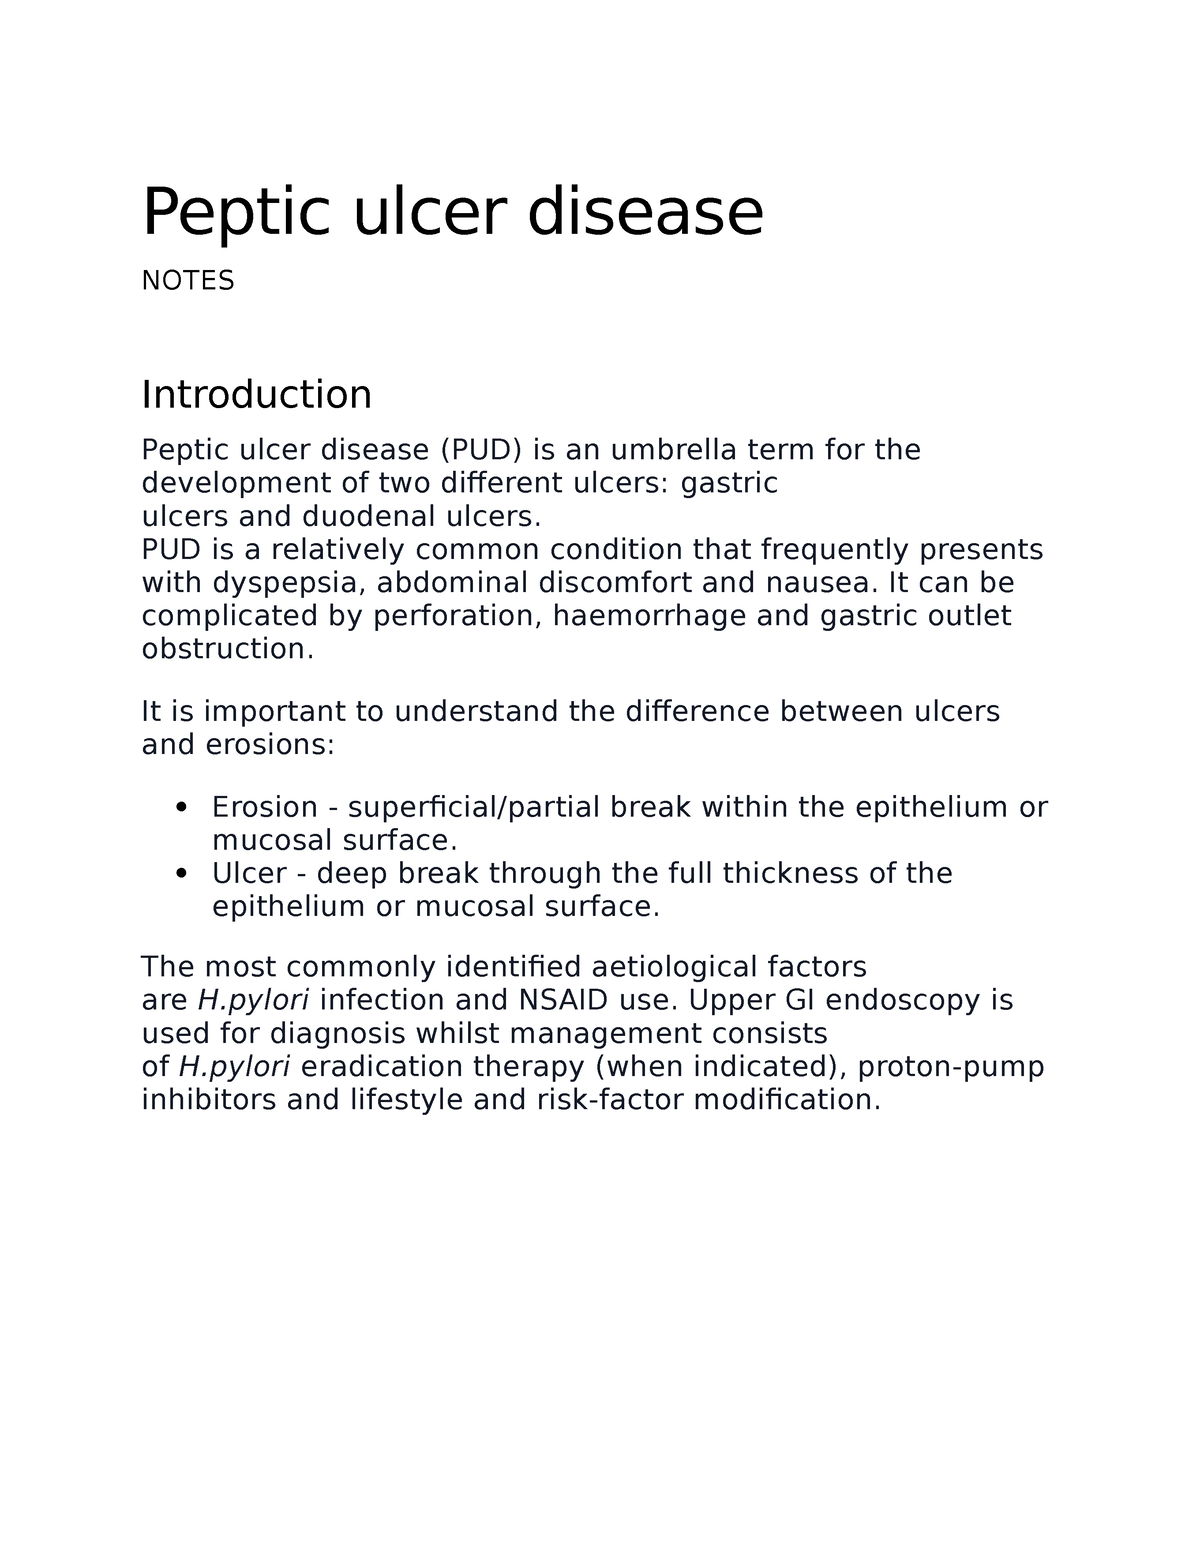 Peptic Ulcer Disease Lecture Notes Peptic Ulcer Disease NOTES Introduction Peptic Ulcer